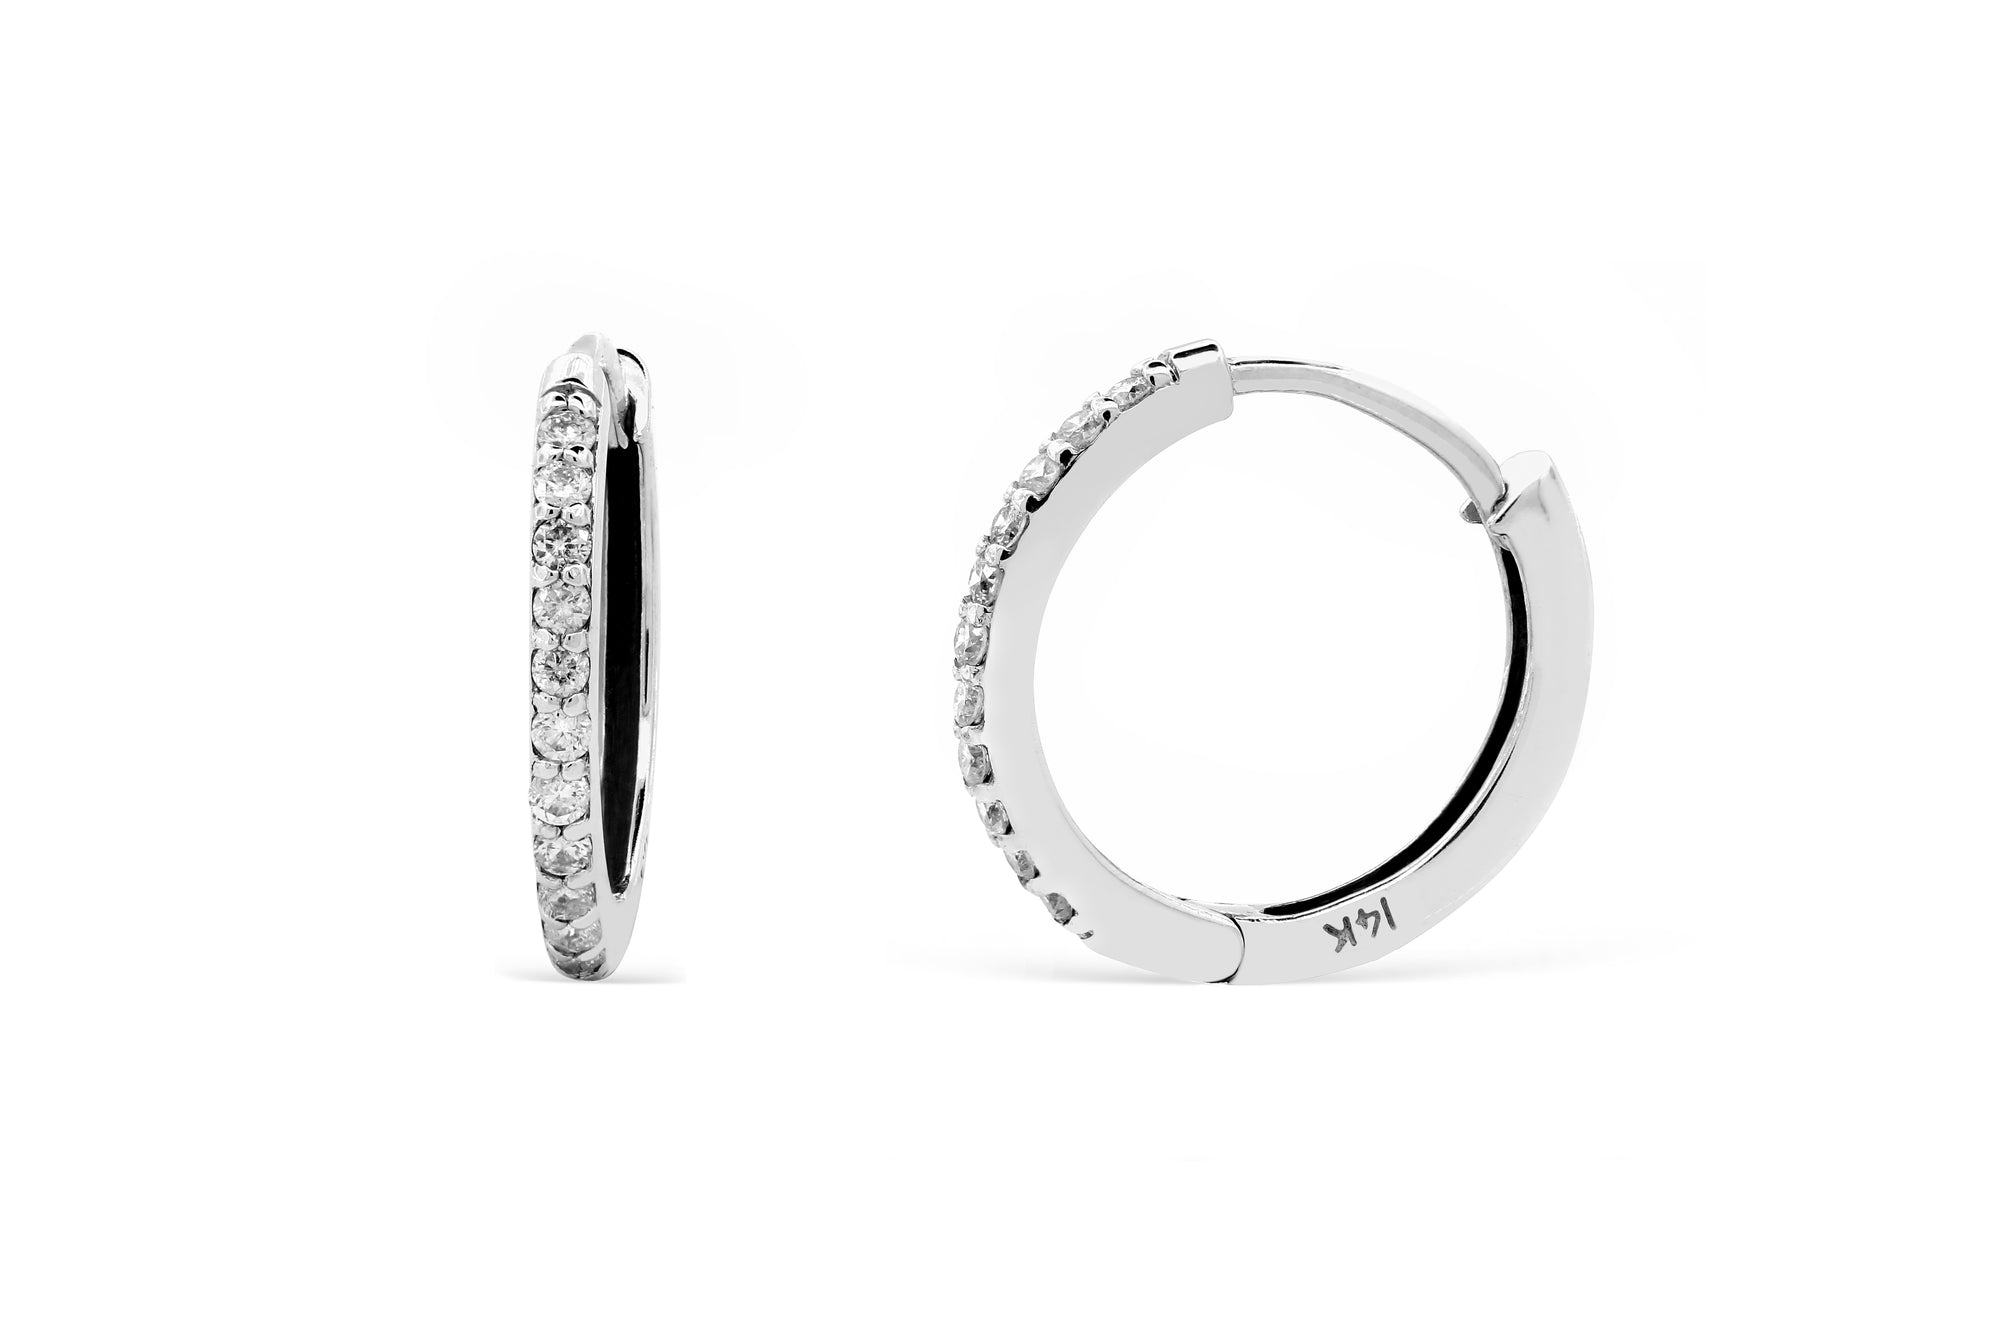 0.24 CT TW Round Diamond Hoop Earrings 14K White Gold DER011 - NorthandSouthJewelry